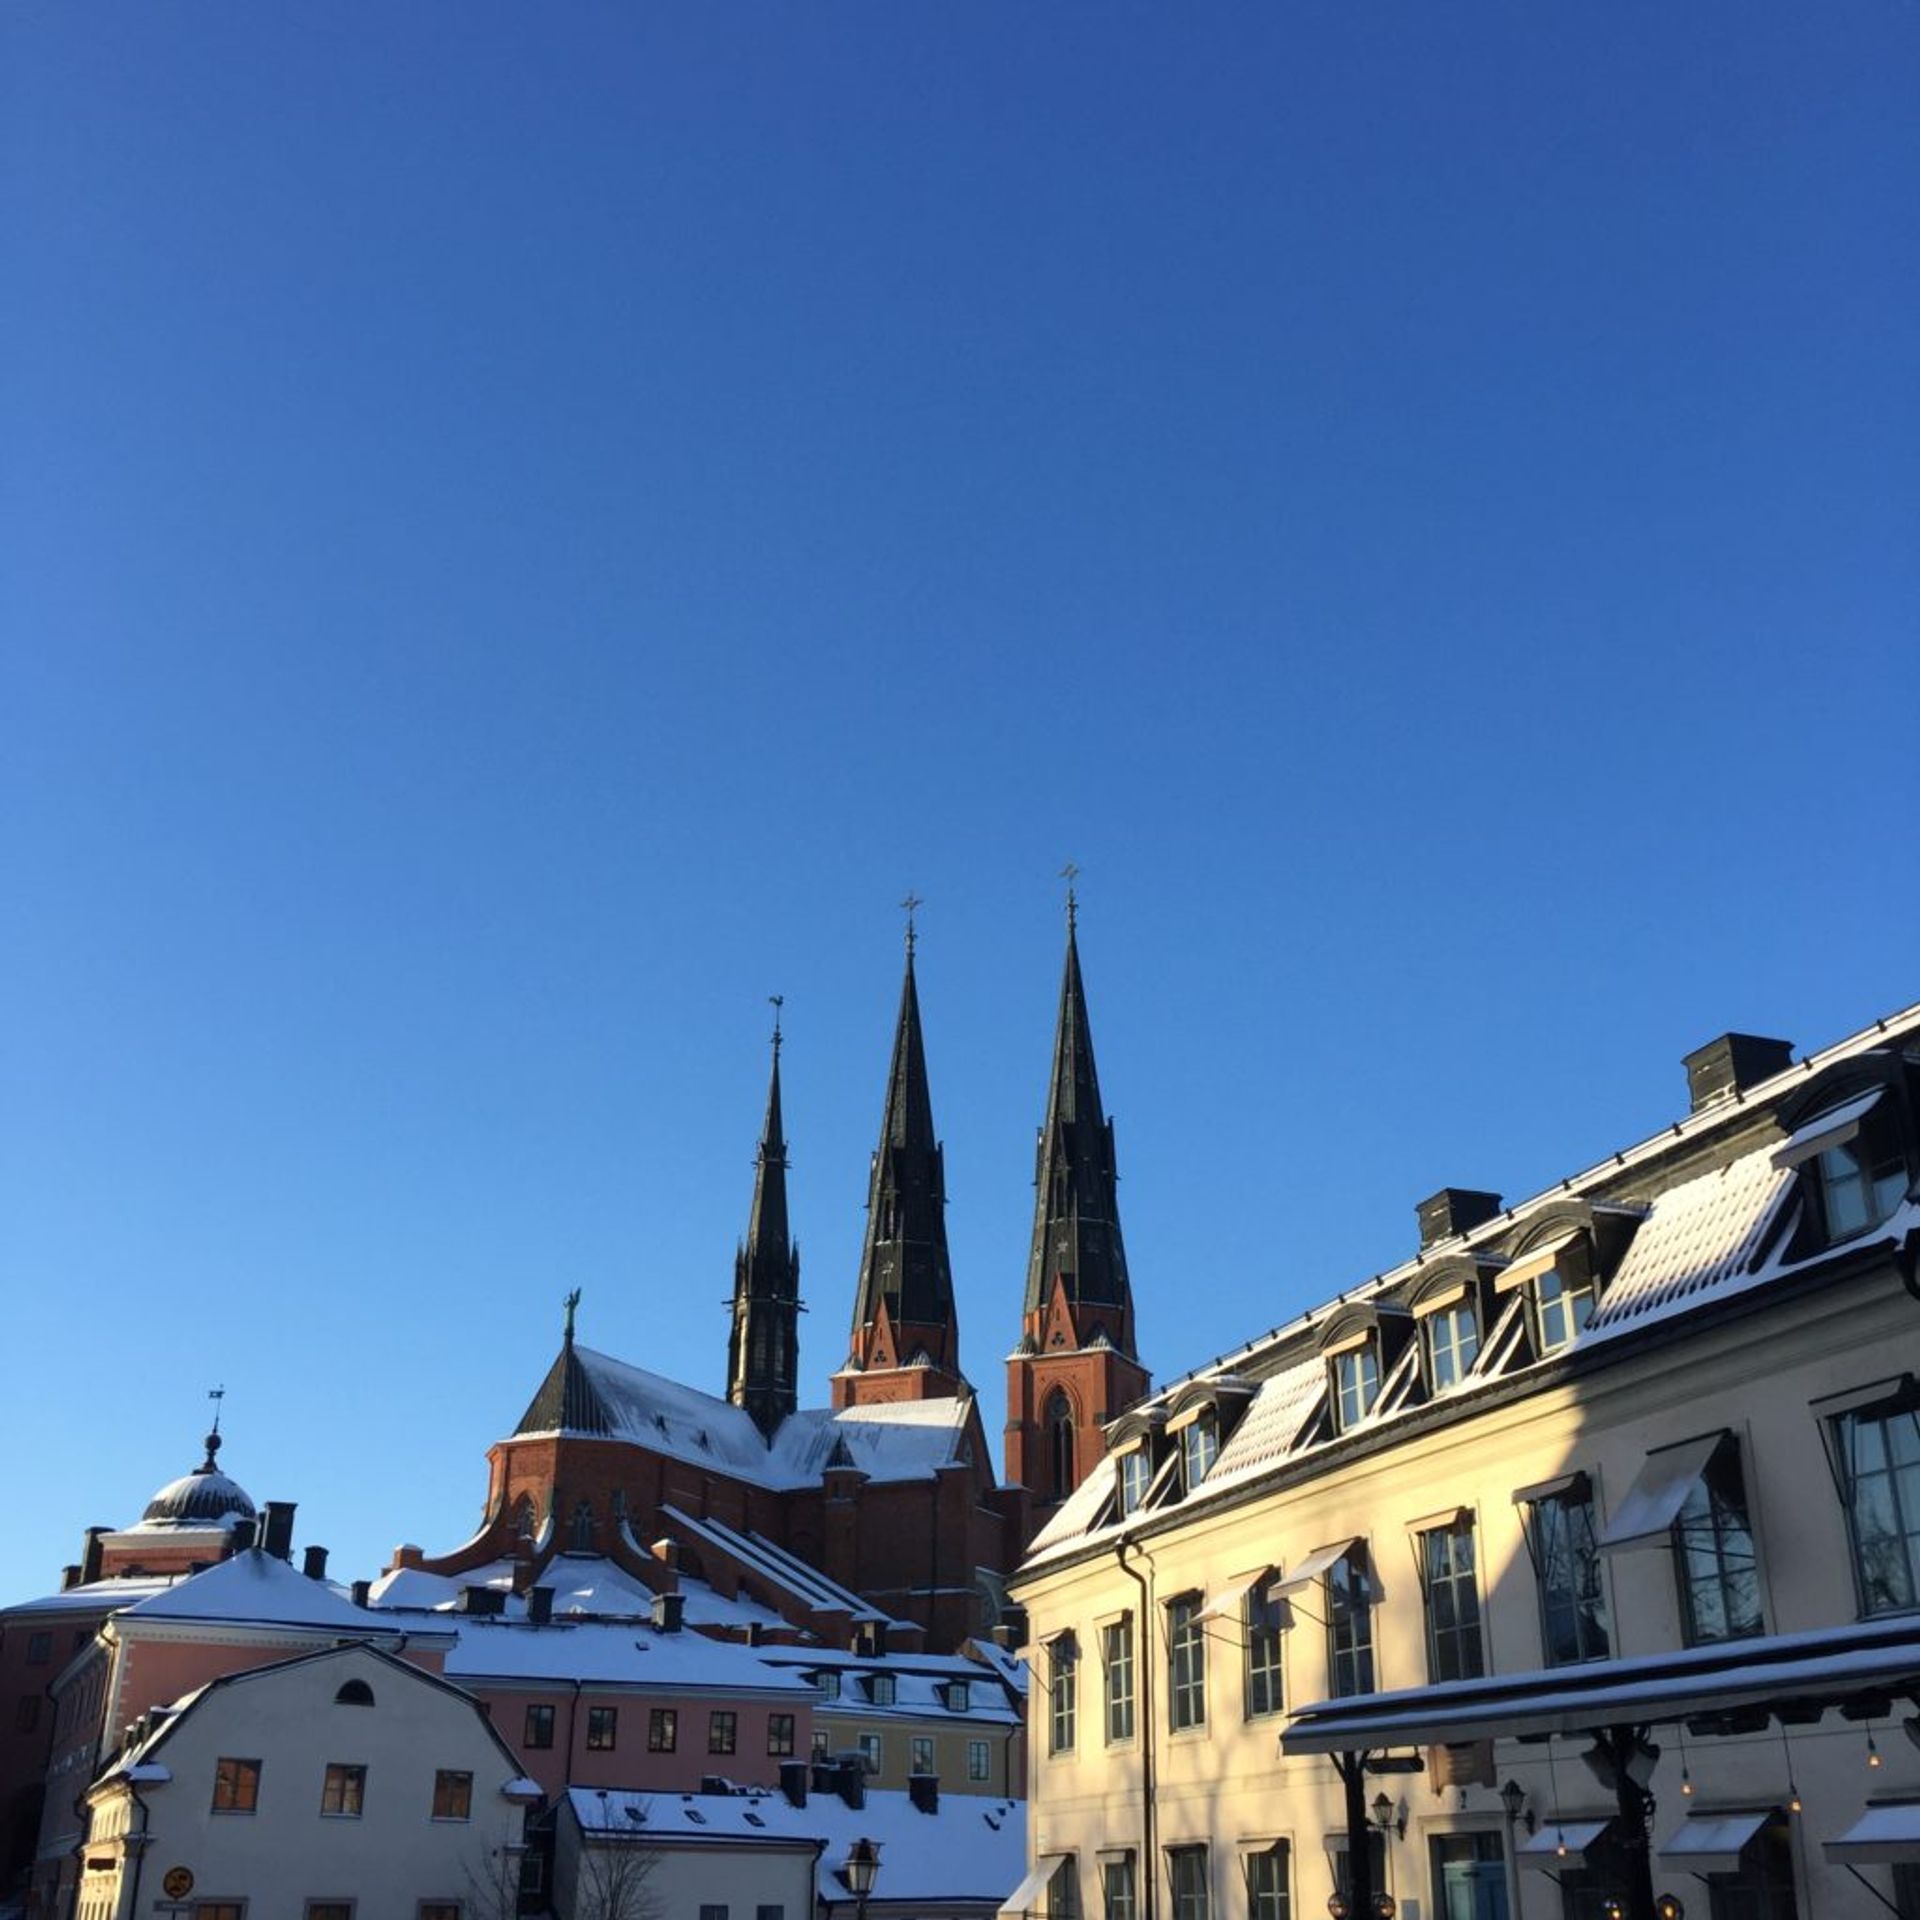 Uppsala skyline with snow on the rooftops